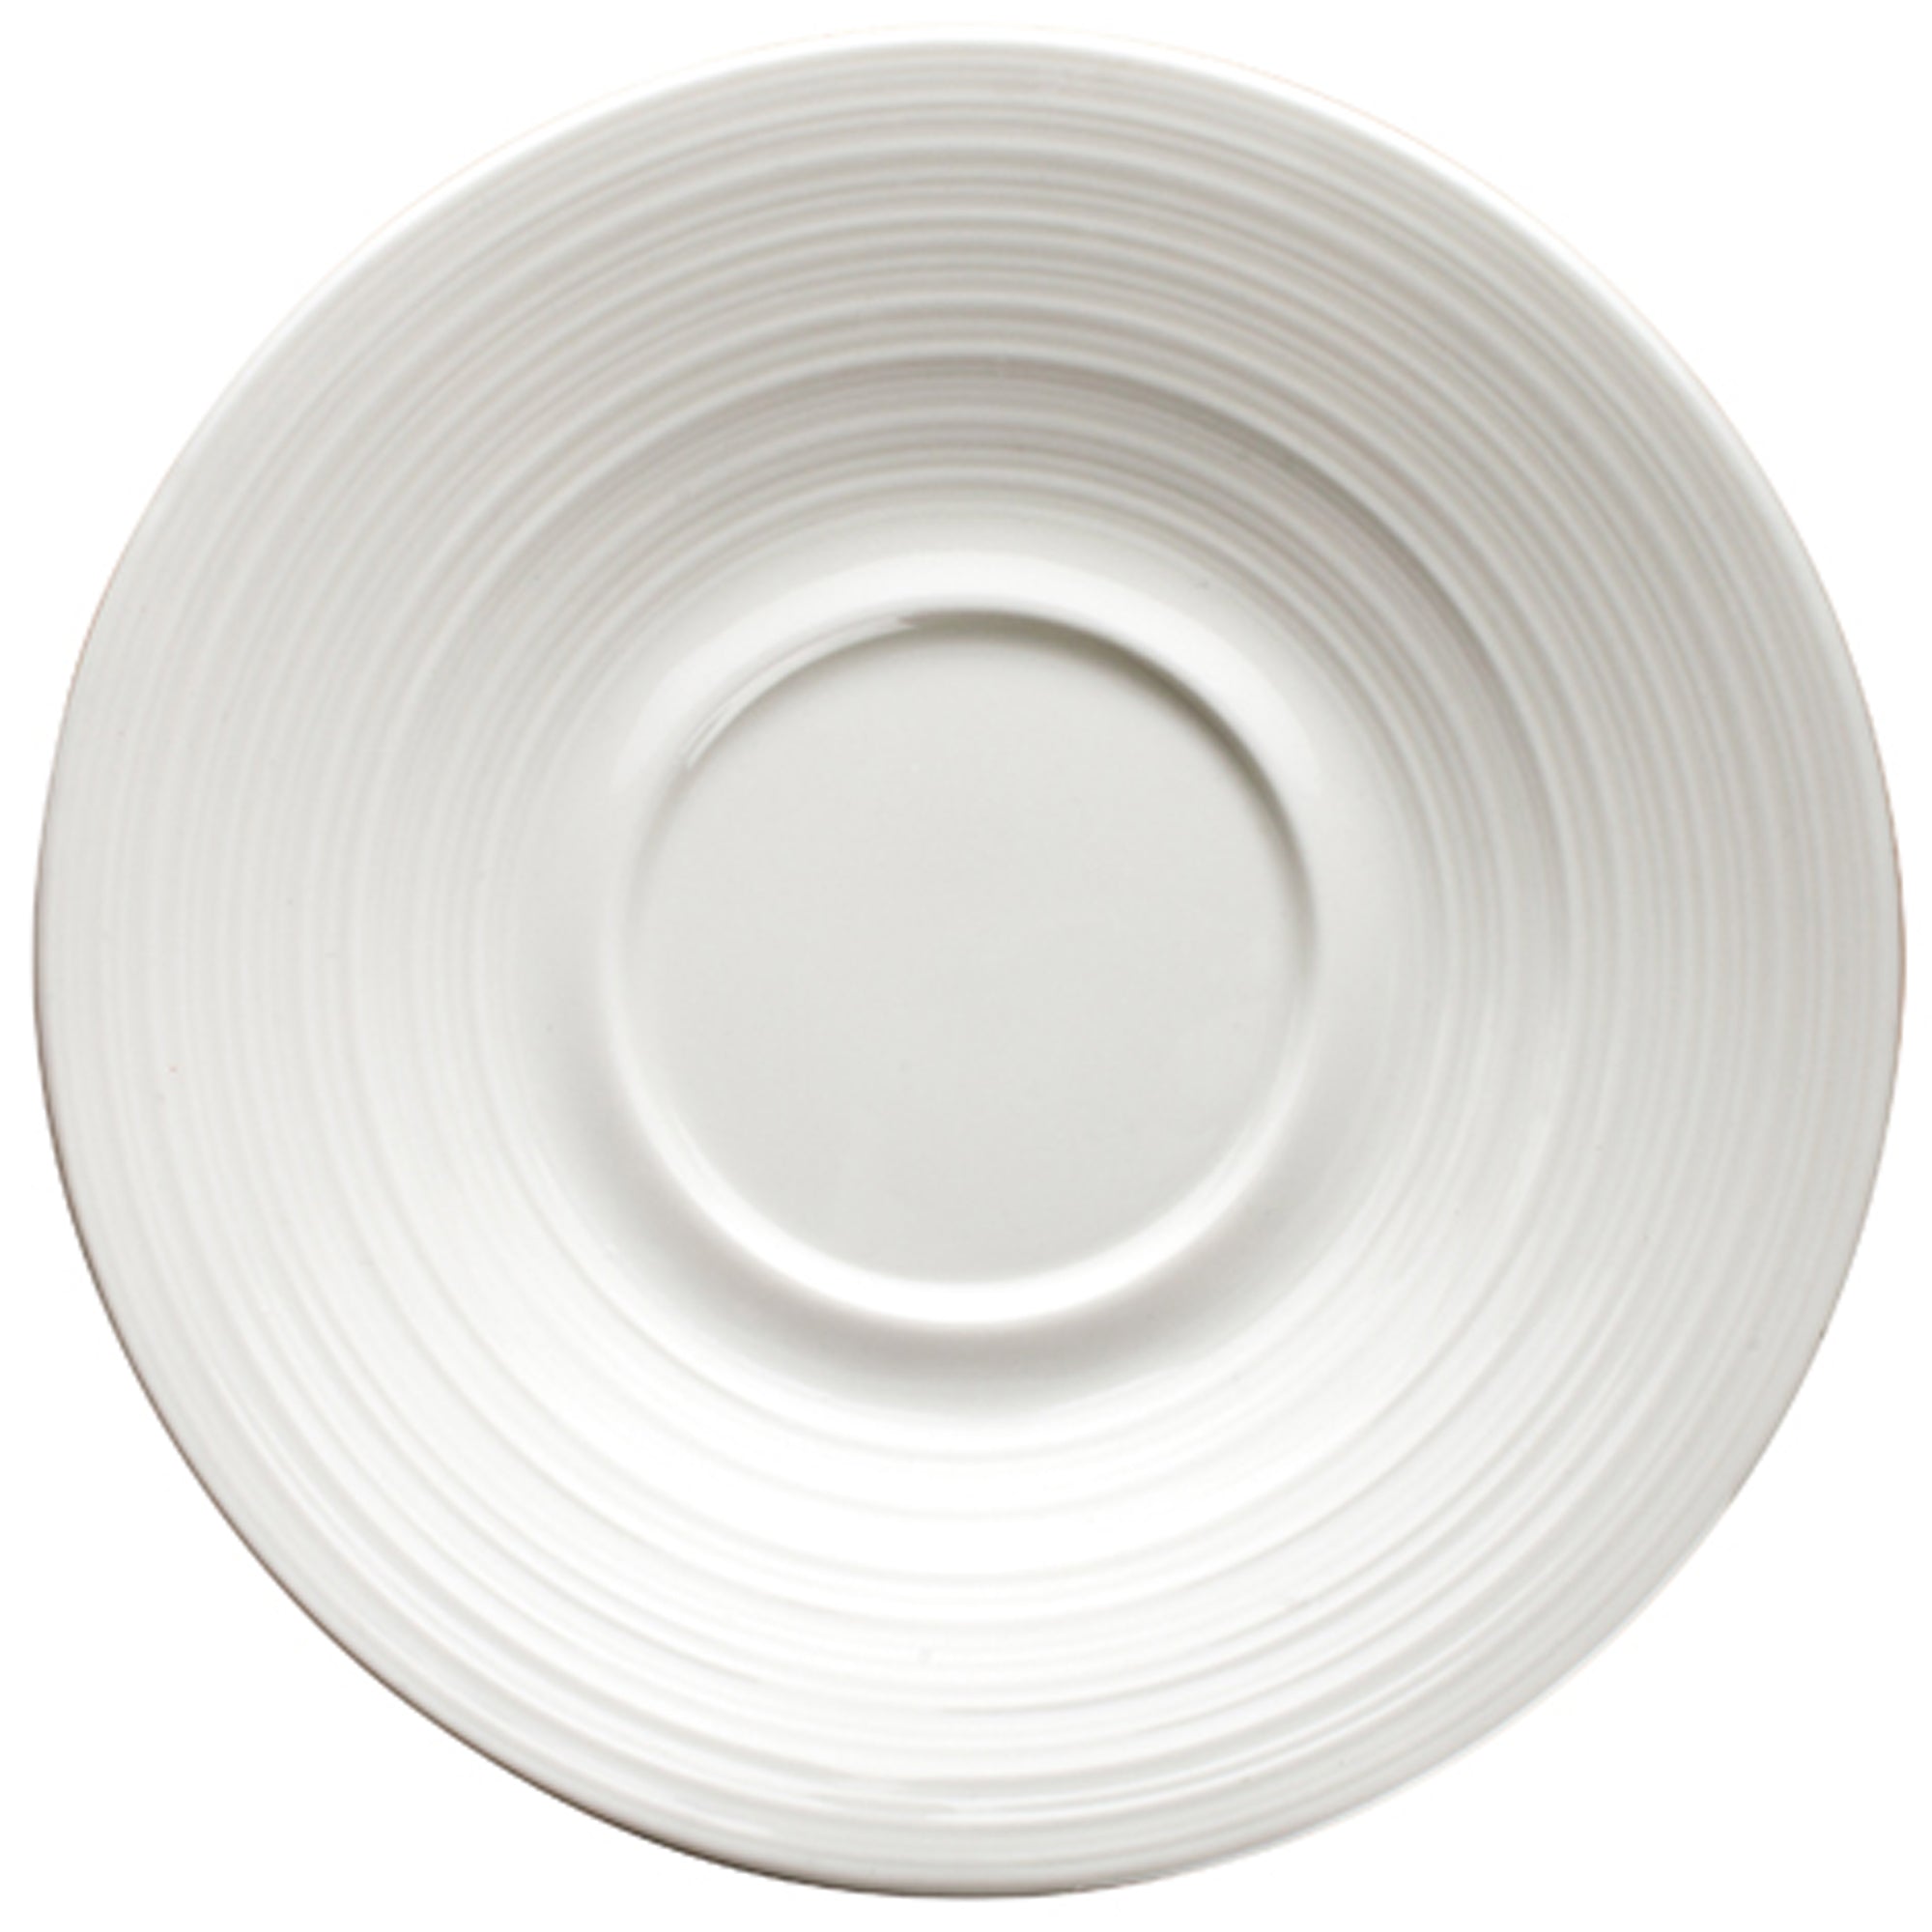 6 inch porcelain white saucer support plate with linear embossment design microwave and dishwasher safe easy to use and clean stackable chip stain and scratch resistant